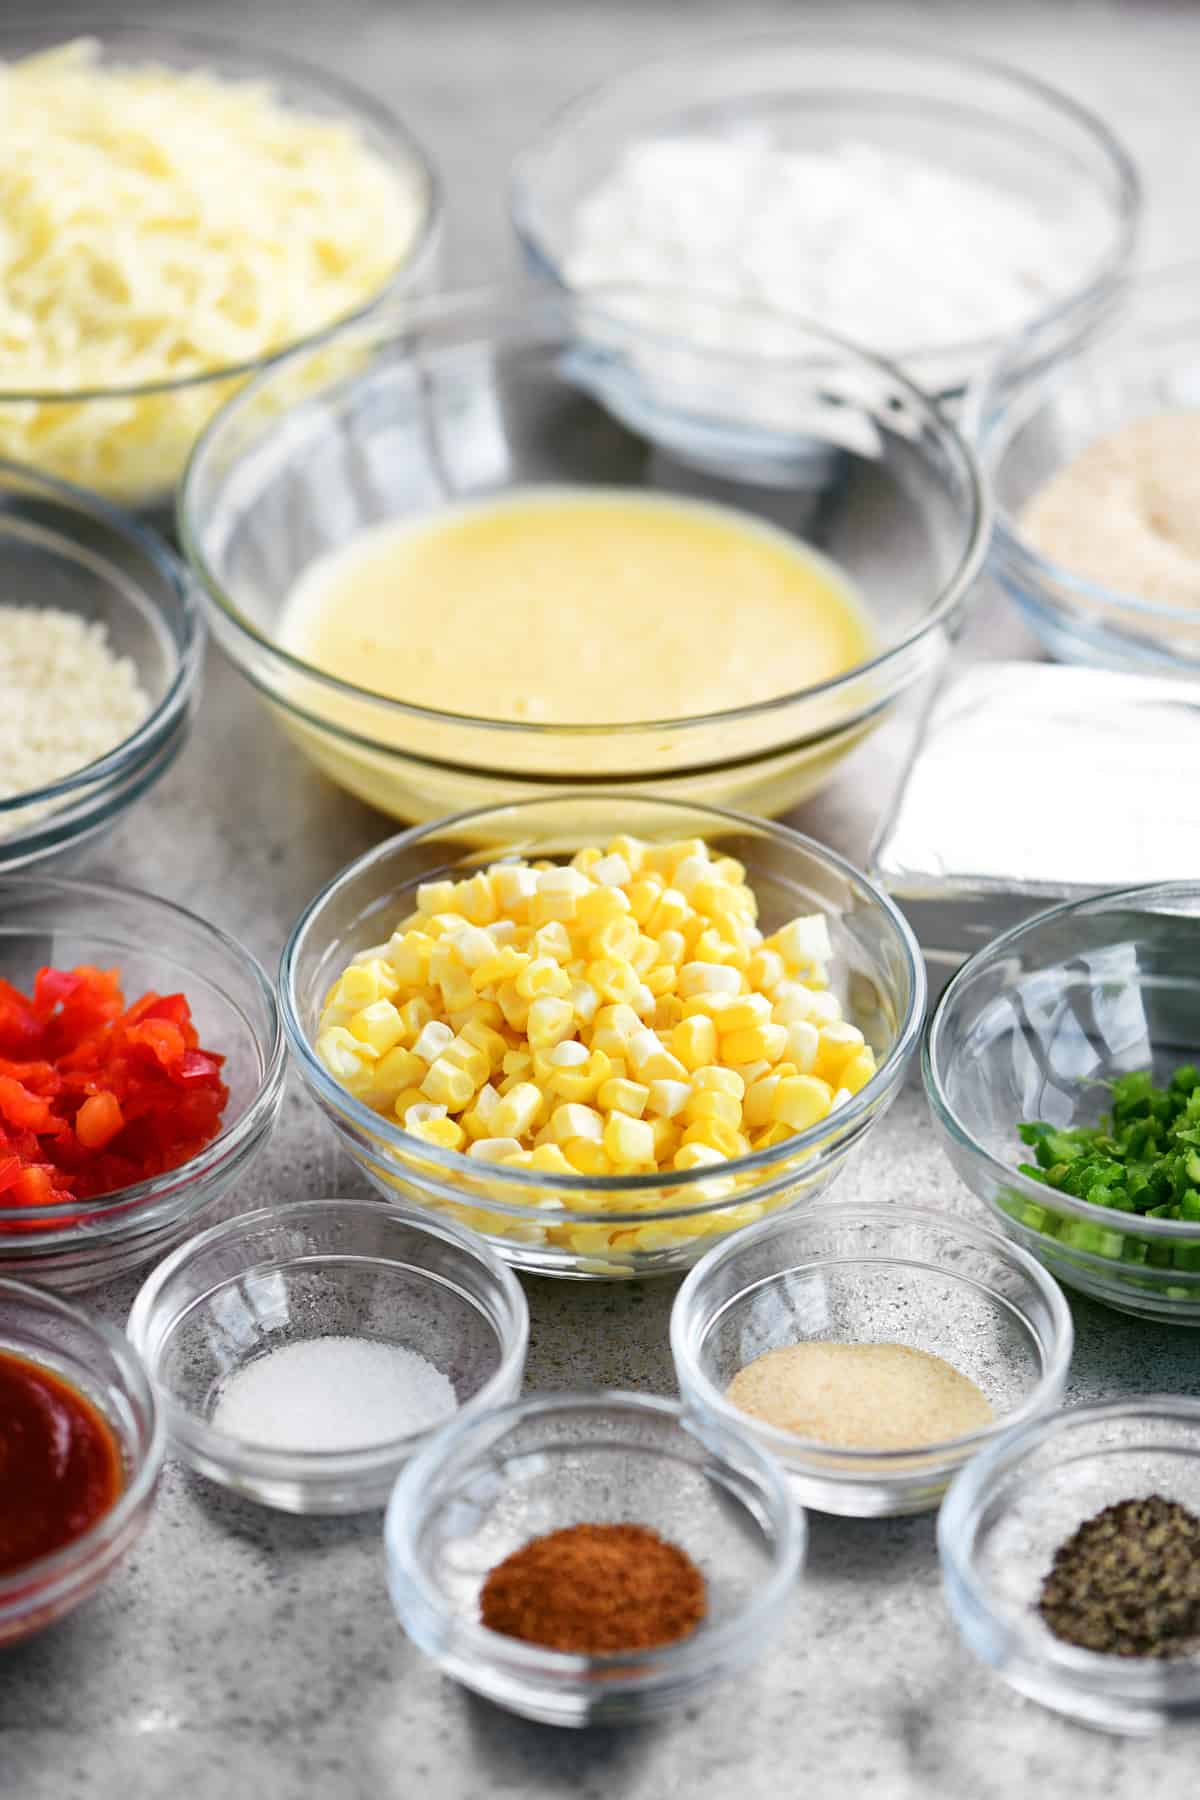 ingredients for corn poppers recipe in bowls